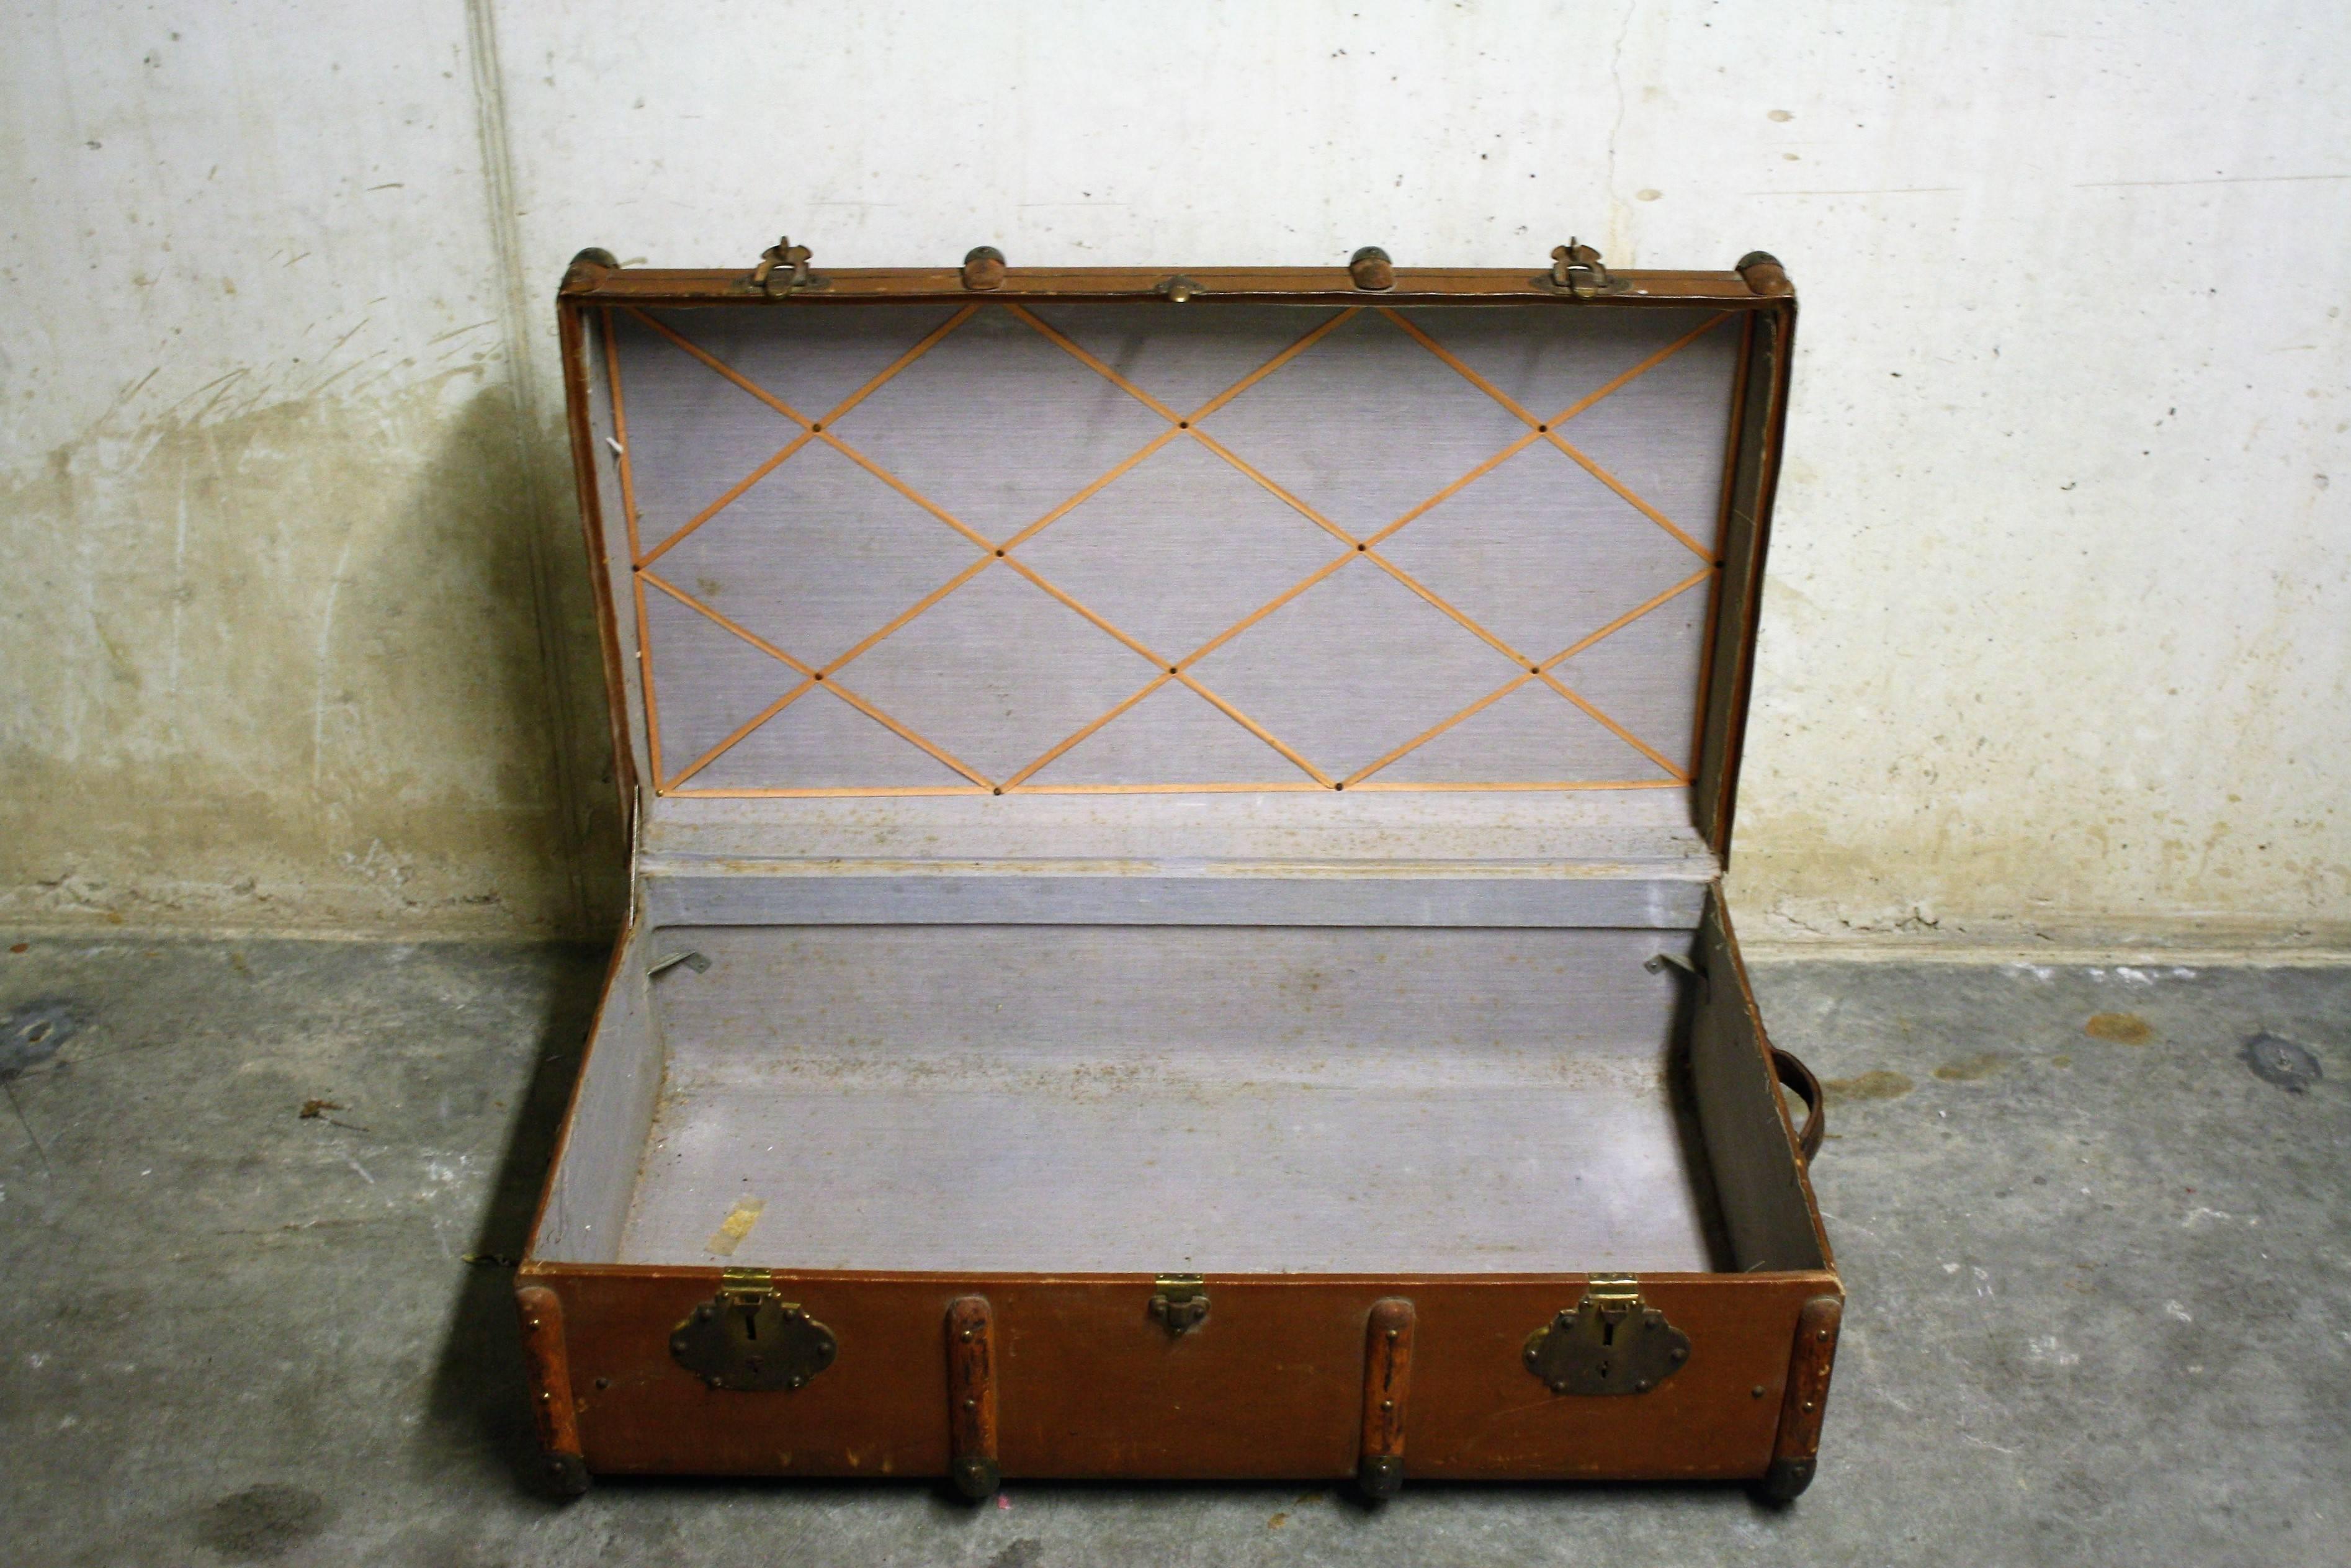 Beautiful vintage quality suitcase or travel trunk.

In the past when travelling was for the wealthy, these suitcases or travel trunks where used to store as much home goods and clothing as possible. They would be used for long journeys on a train